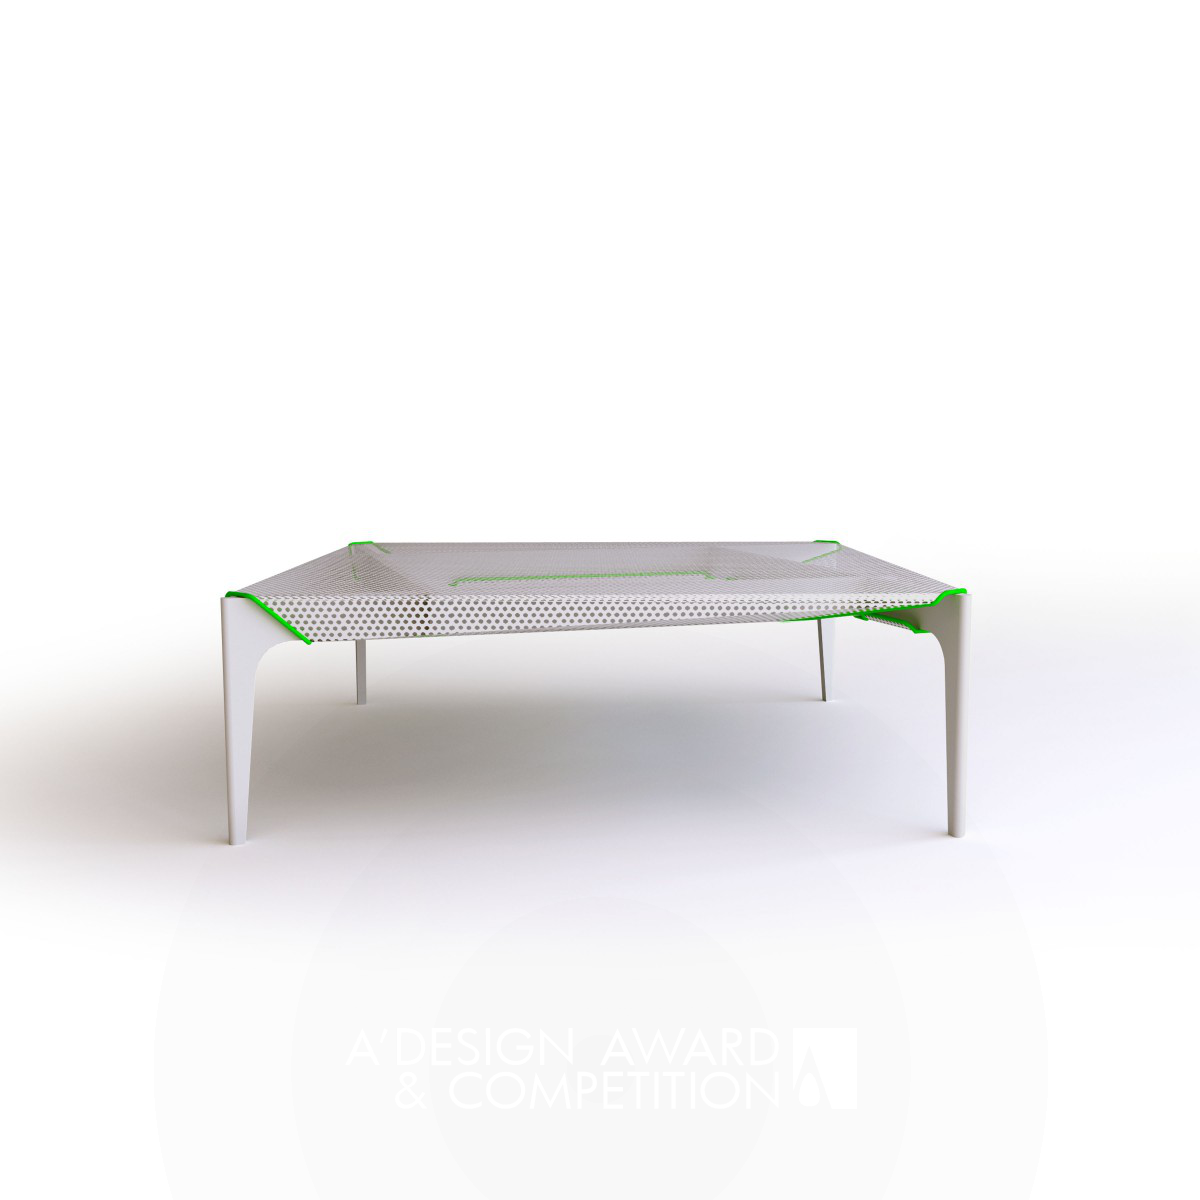 Turturem outdoor table by David Rooth